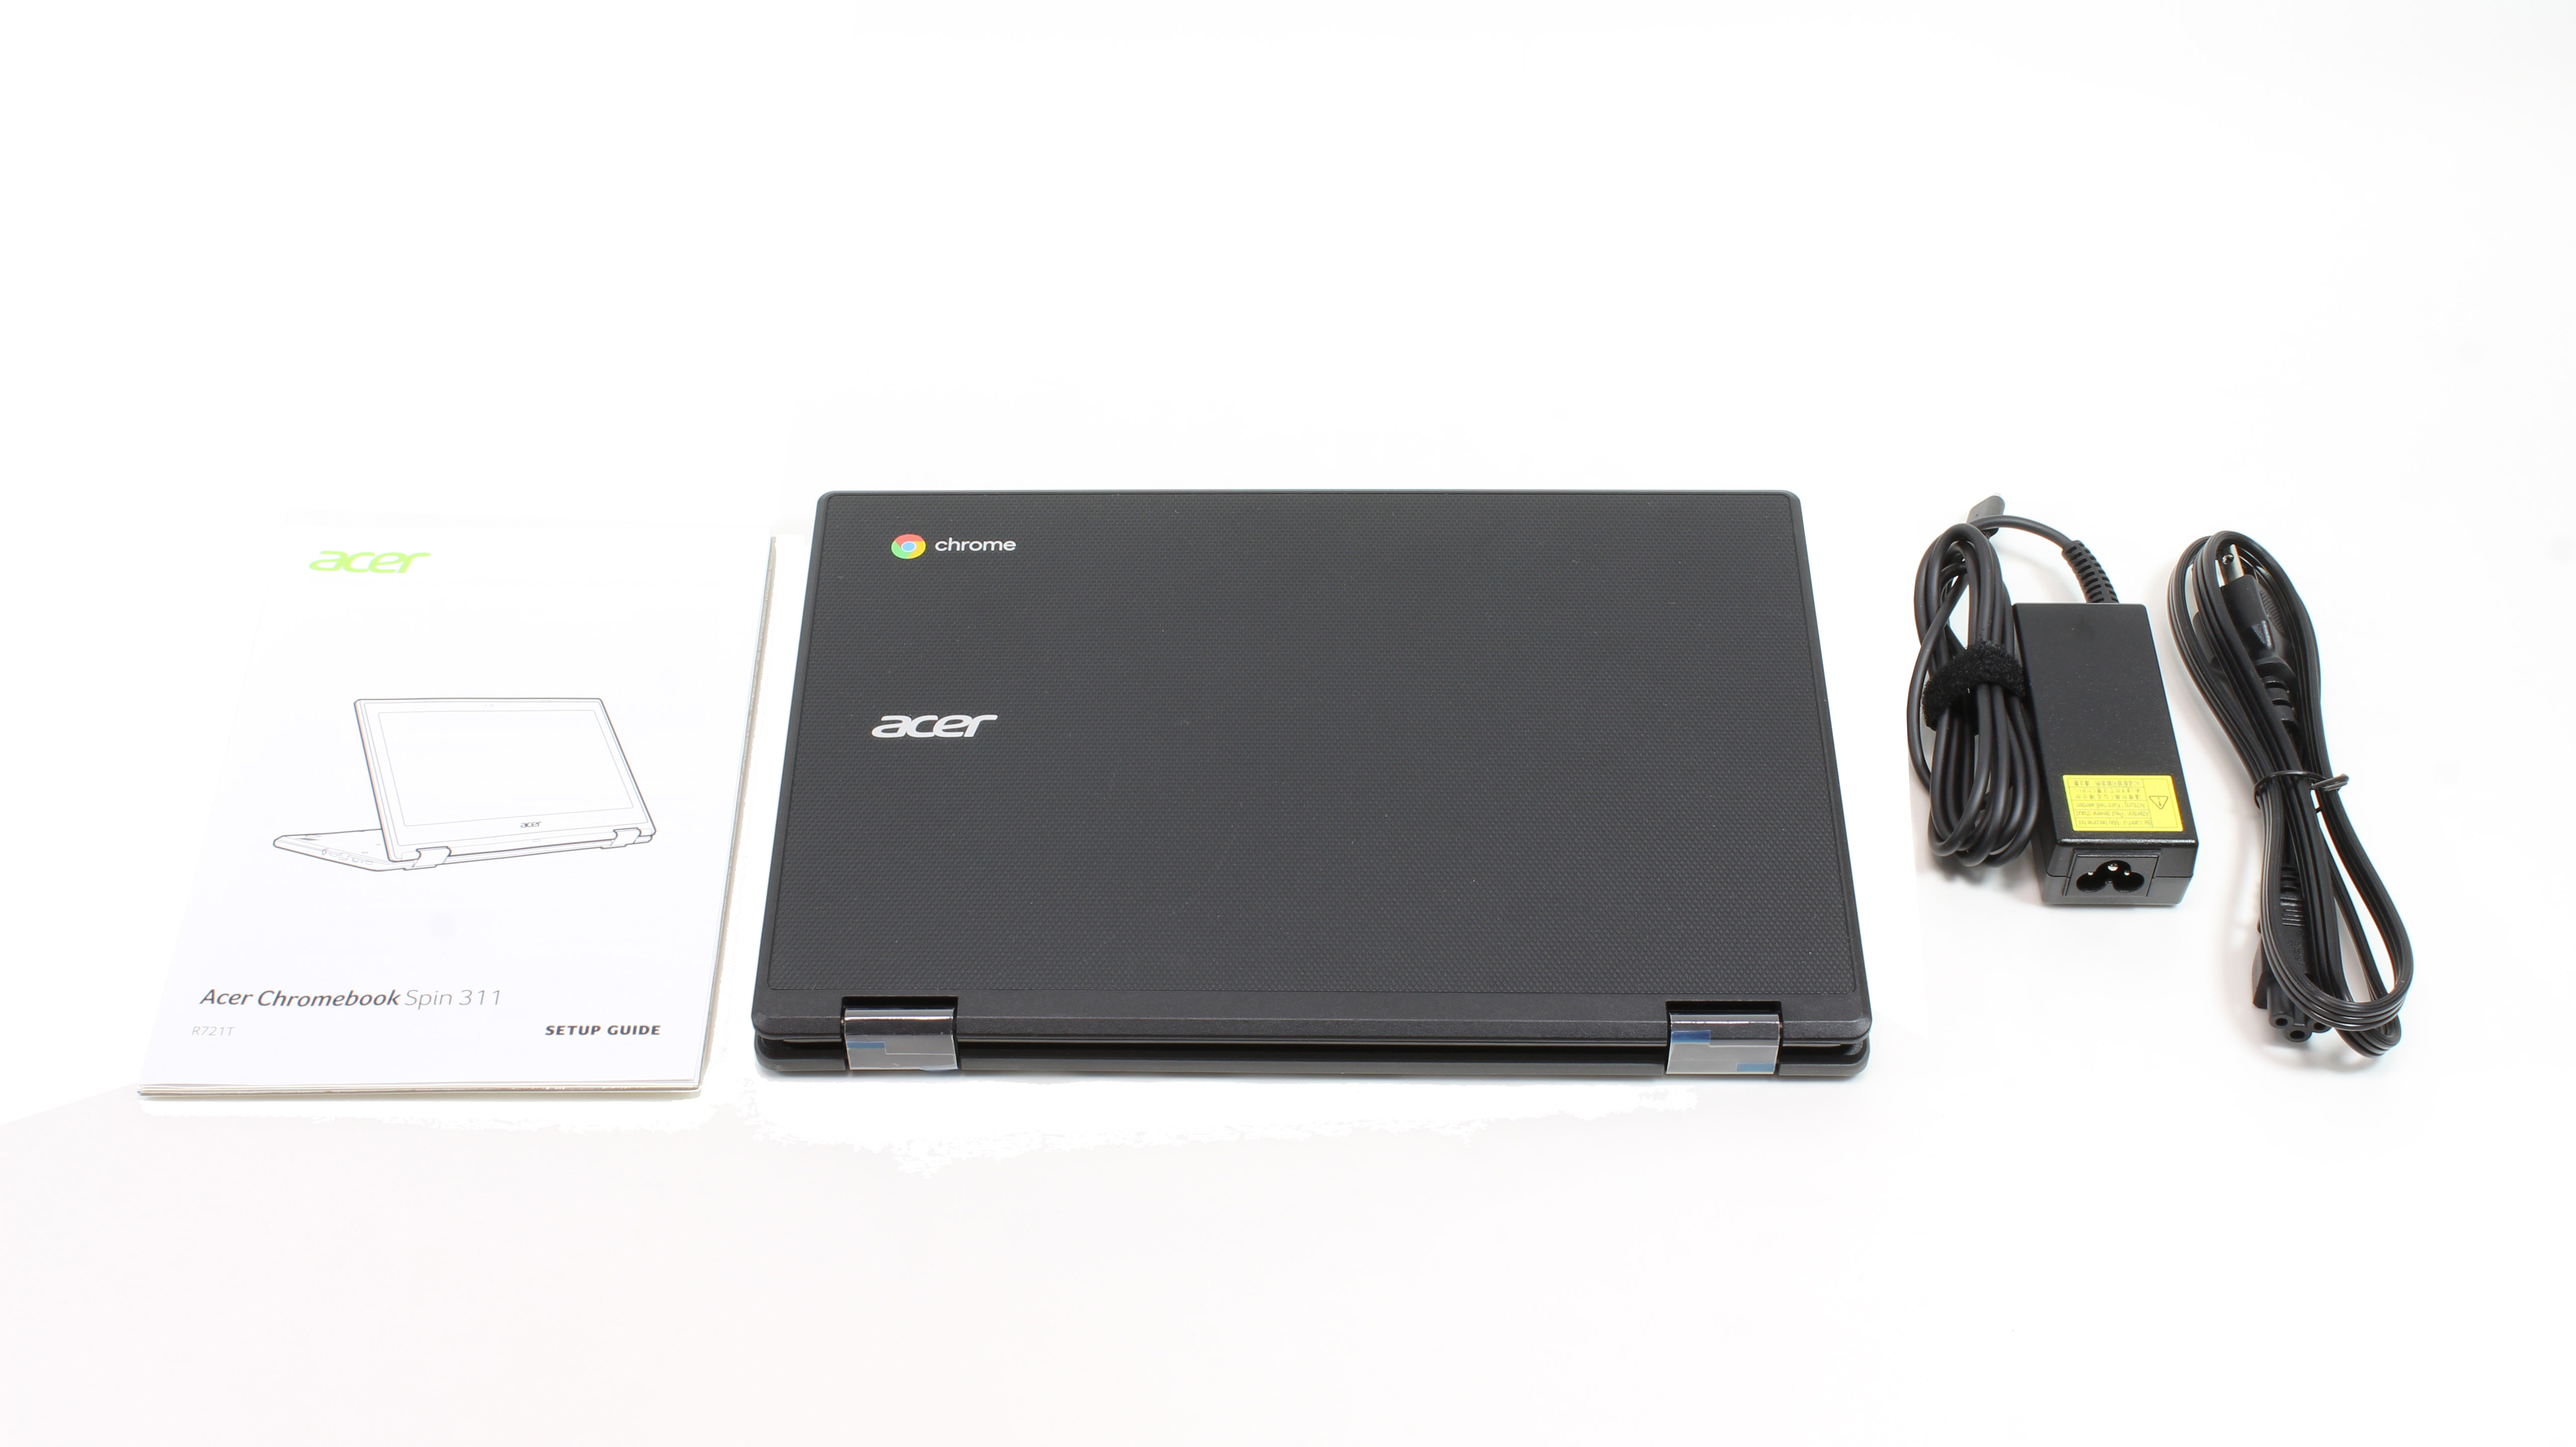 Acer Chromebook Spin 311 R721T 11.6" Touch AMD A6 9220C 1.8 GHz 4GB RAM 32GB eMMC Chrome OS NX.HBRAA.003 - Click Image to Close